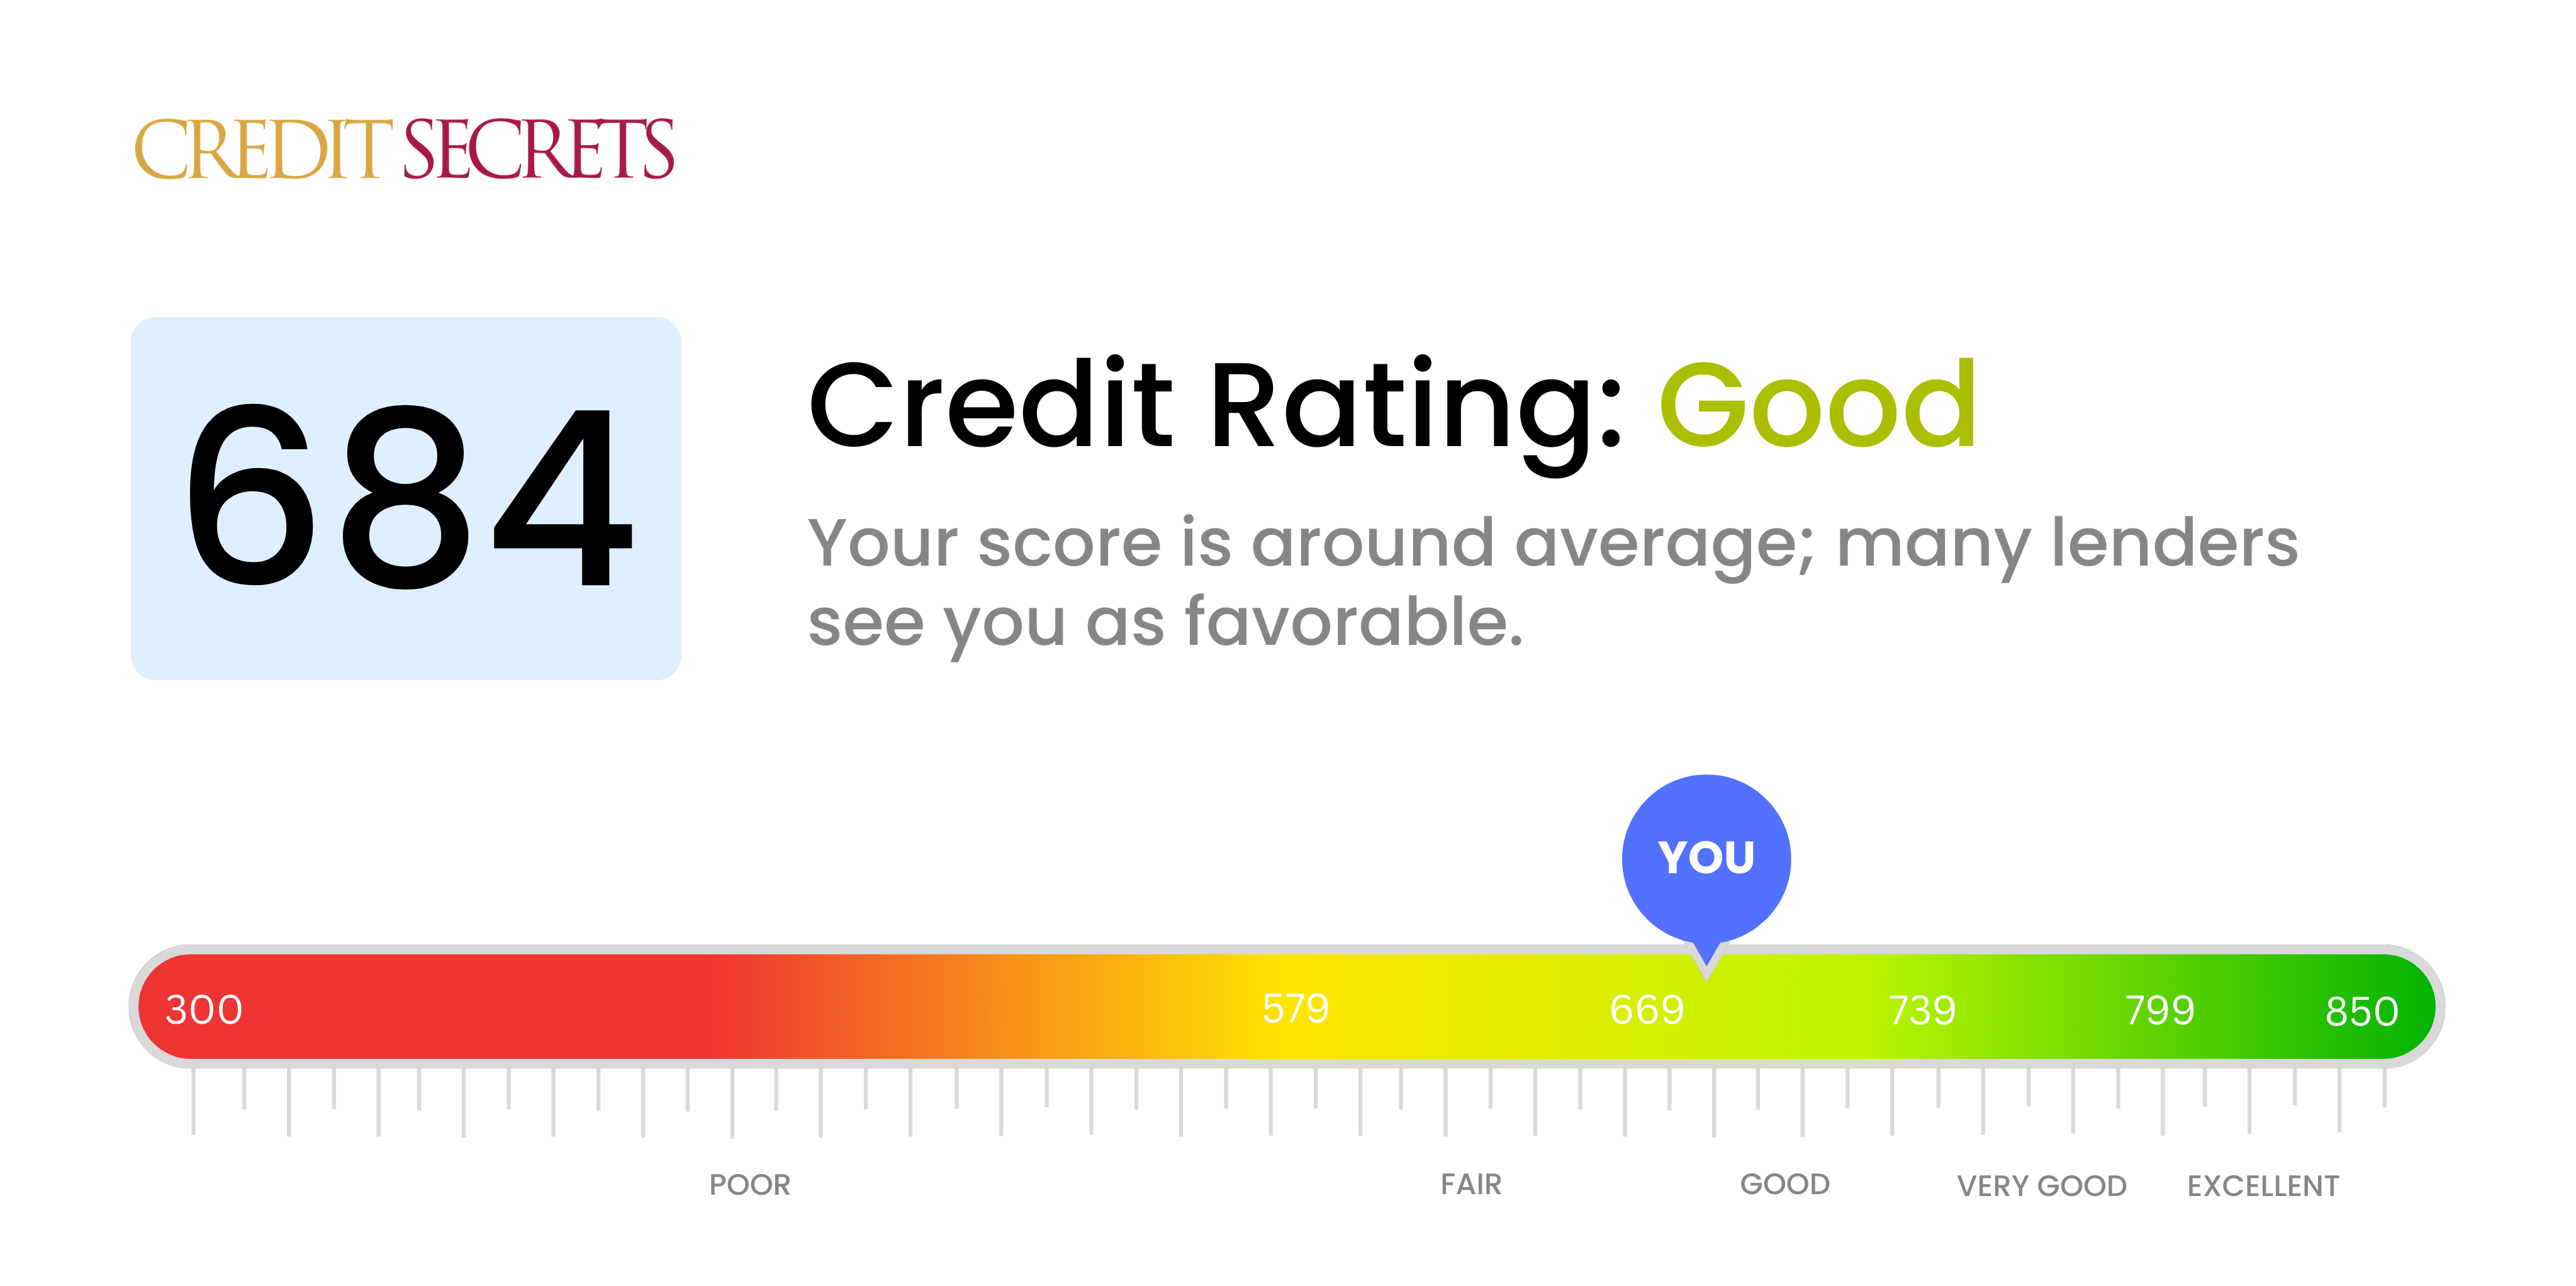 Is 684 a good credit score?